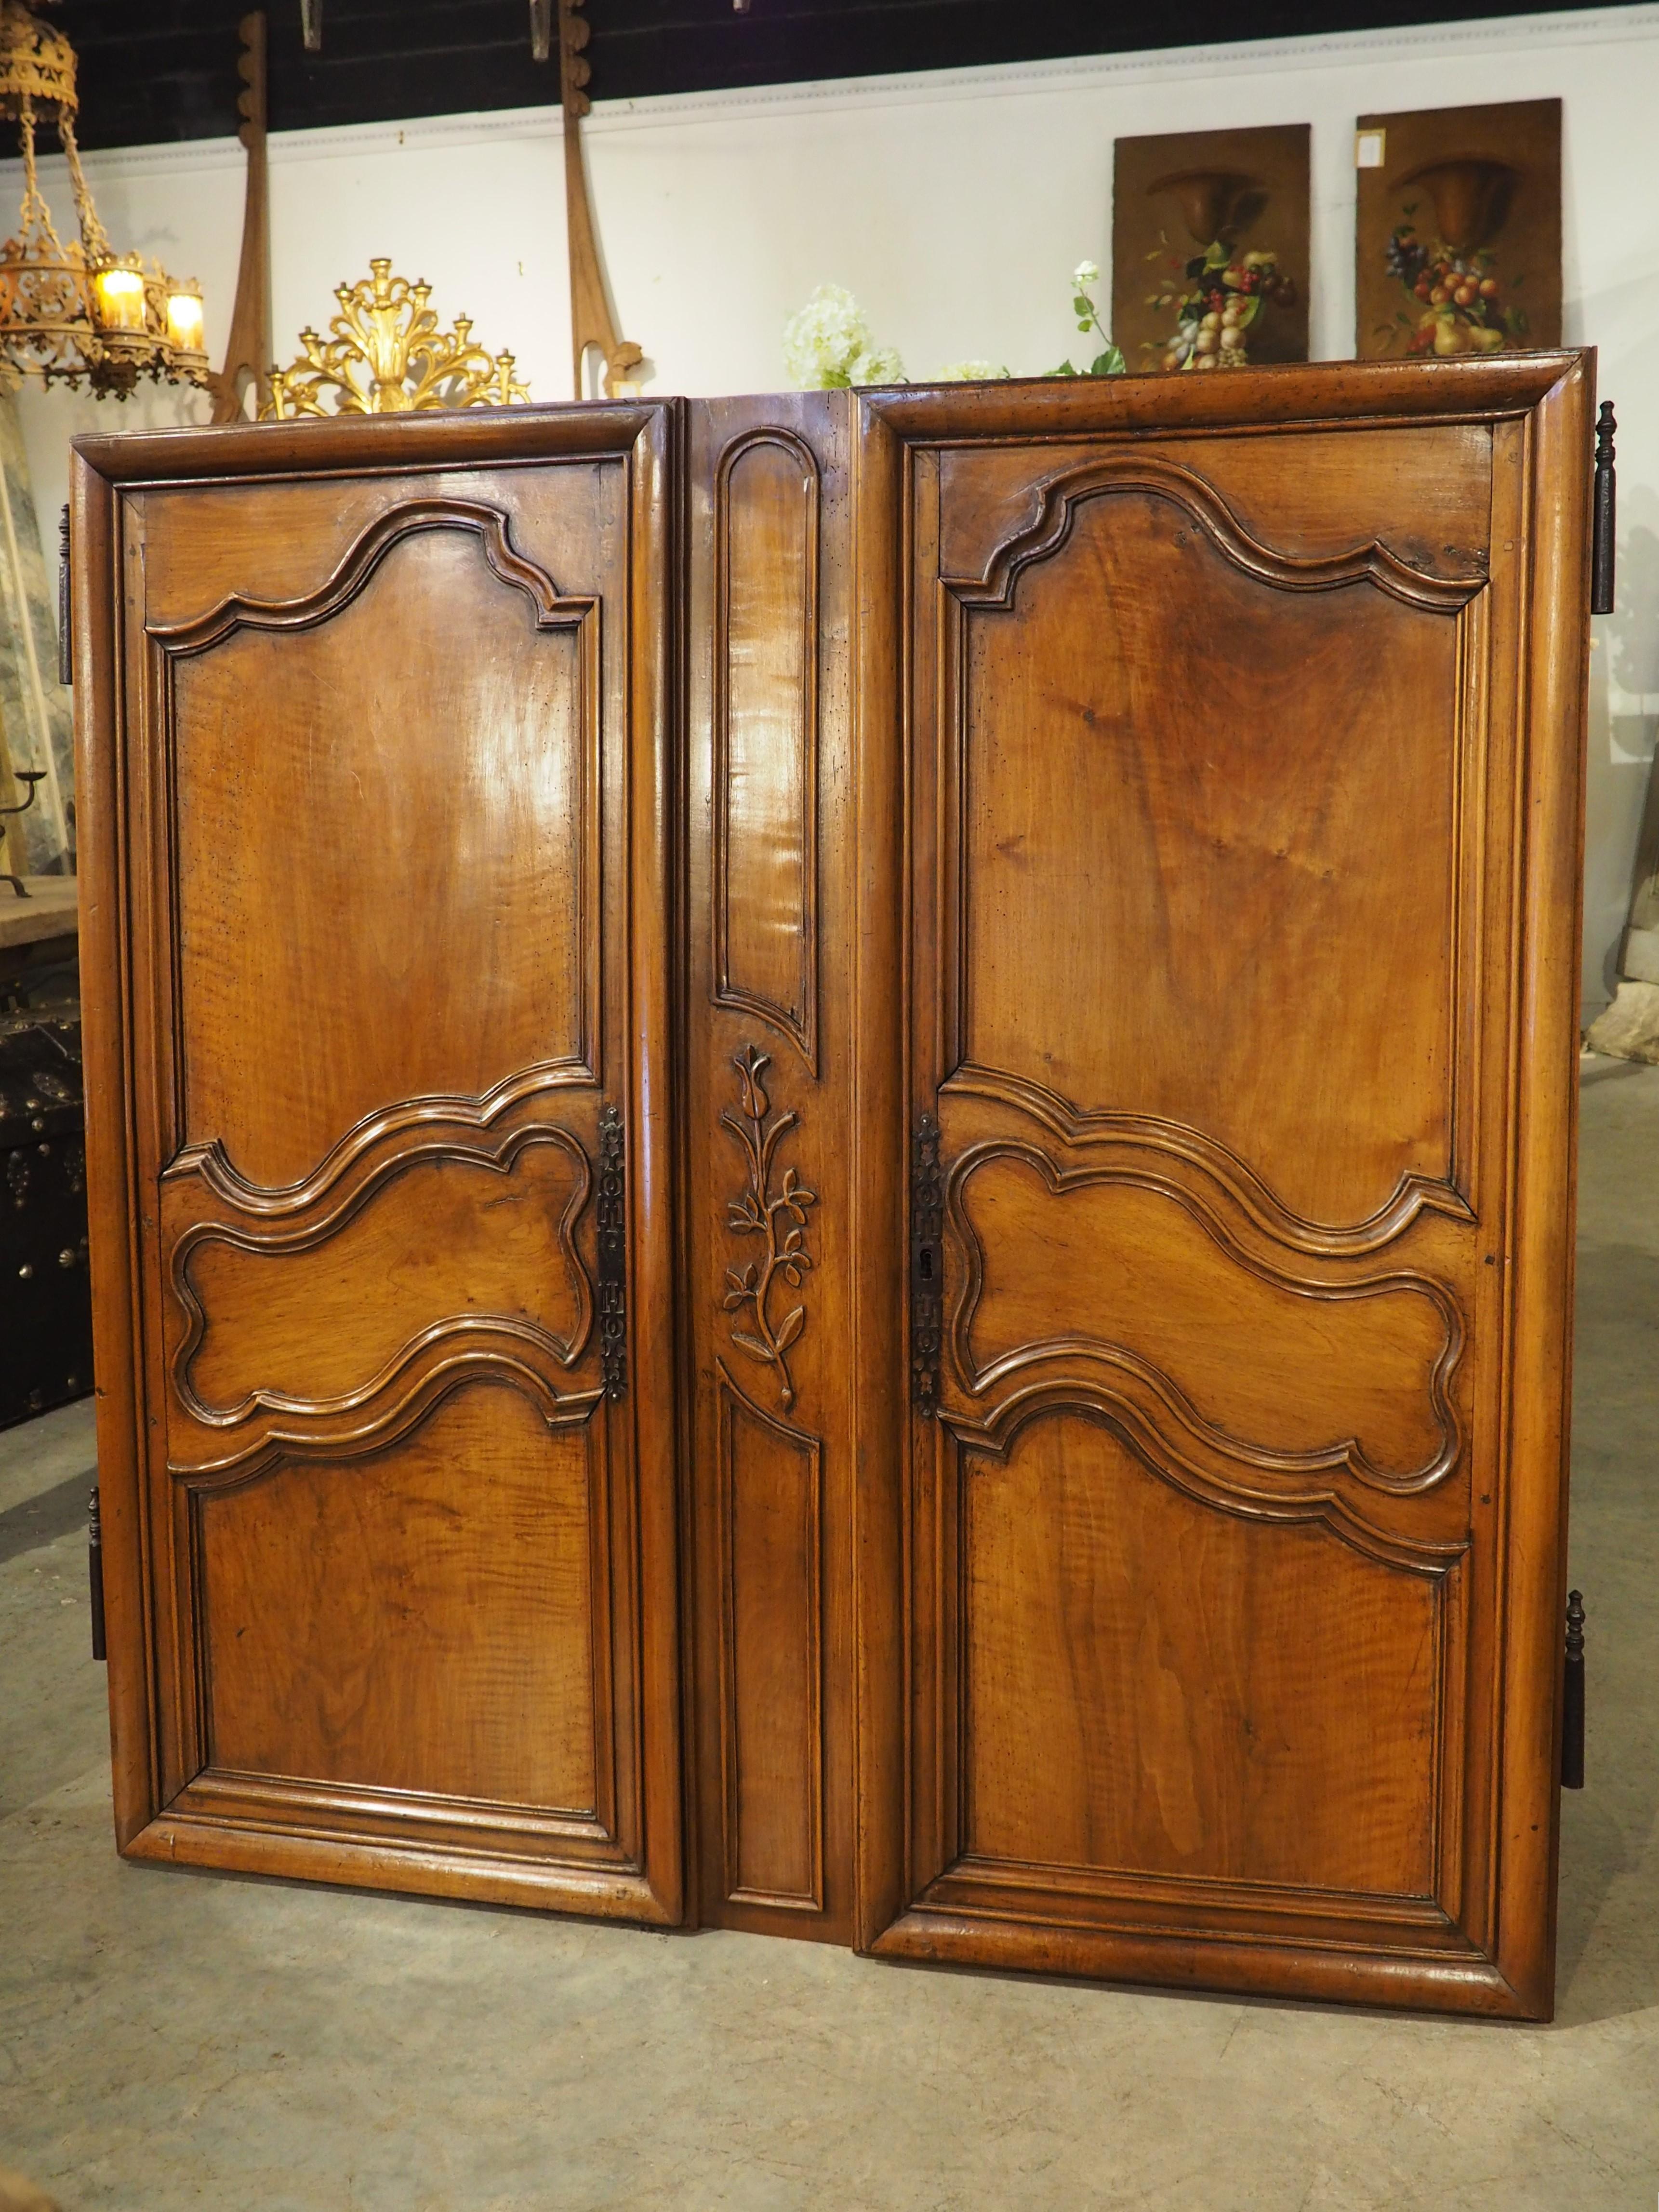 Louis XV Pair of Circa 1750 Solid Walnut Façade or Cabinet Doors from Provence, France For Sale